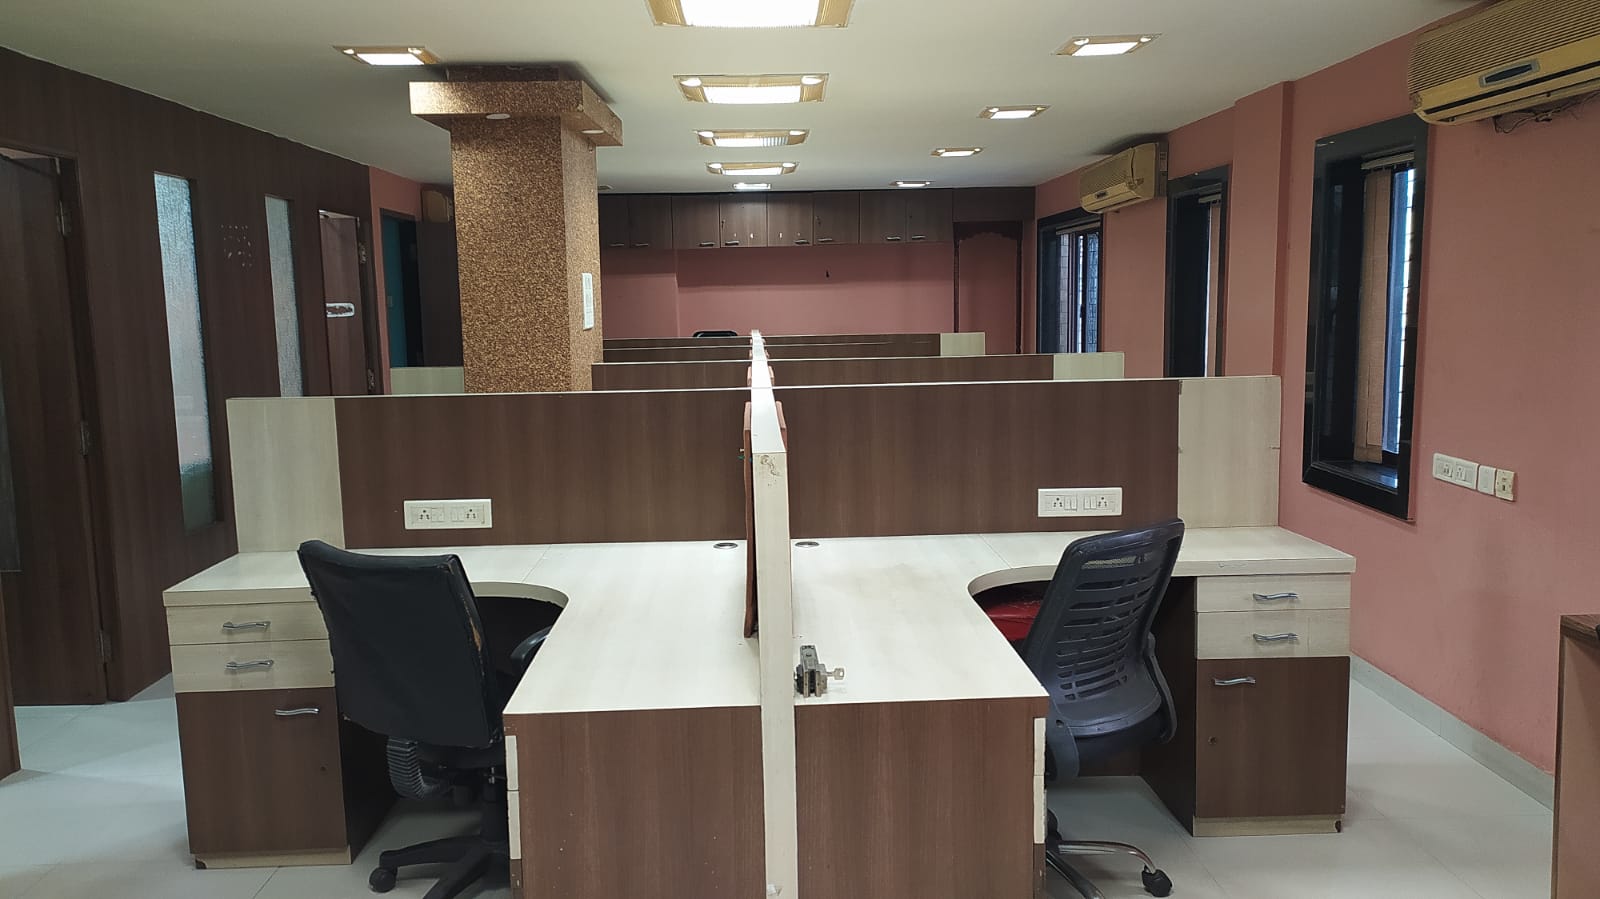 1450 Sq Feet Office Space for Rent Only in Alipore